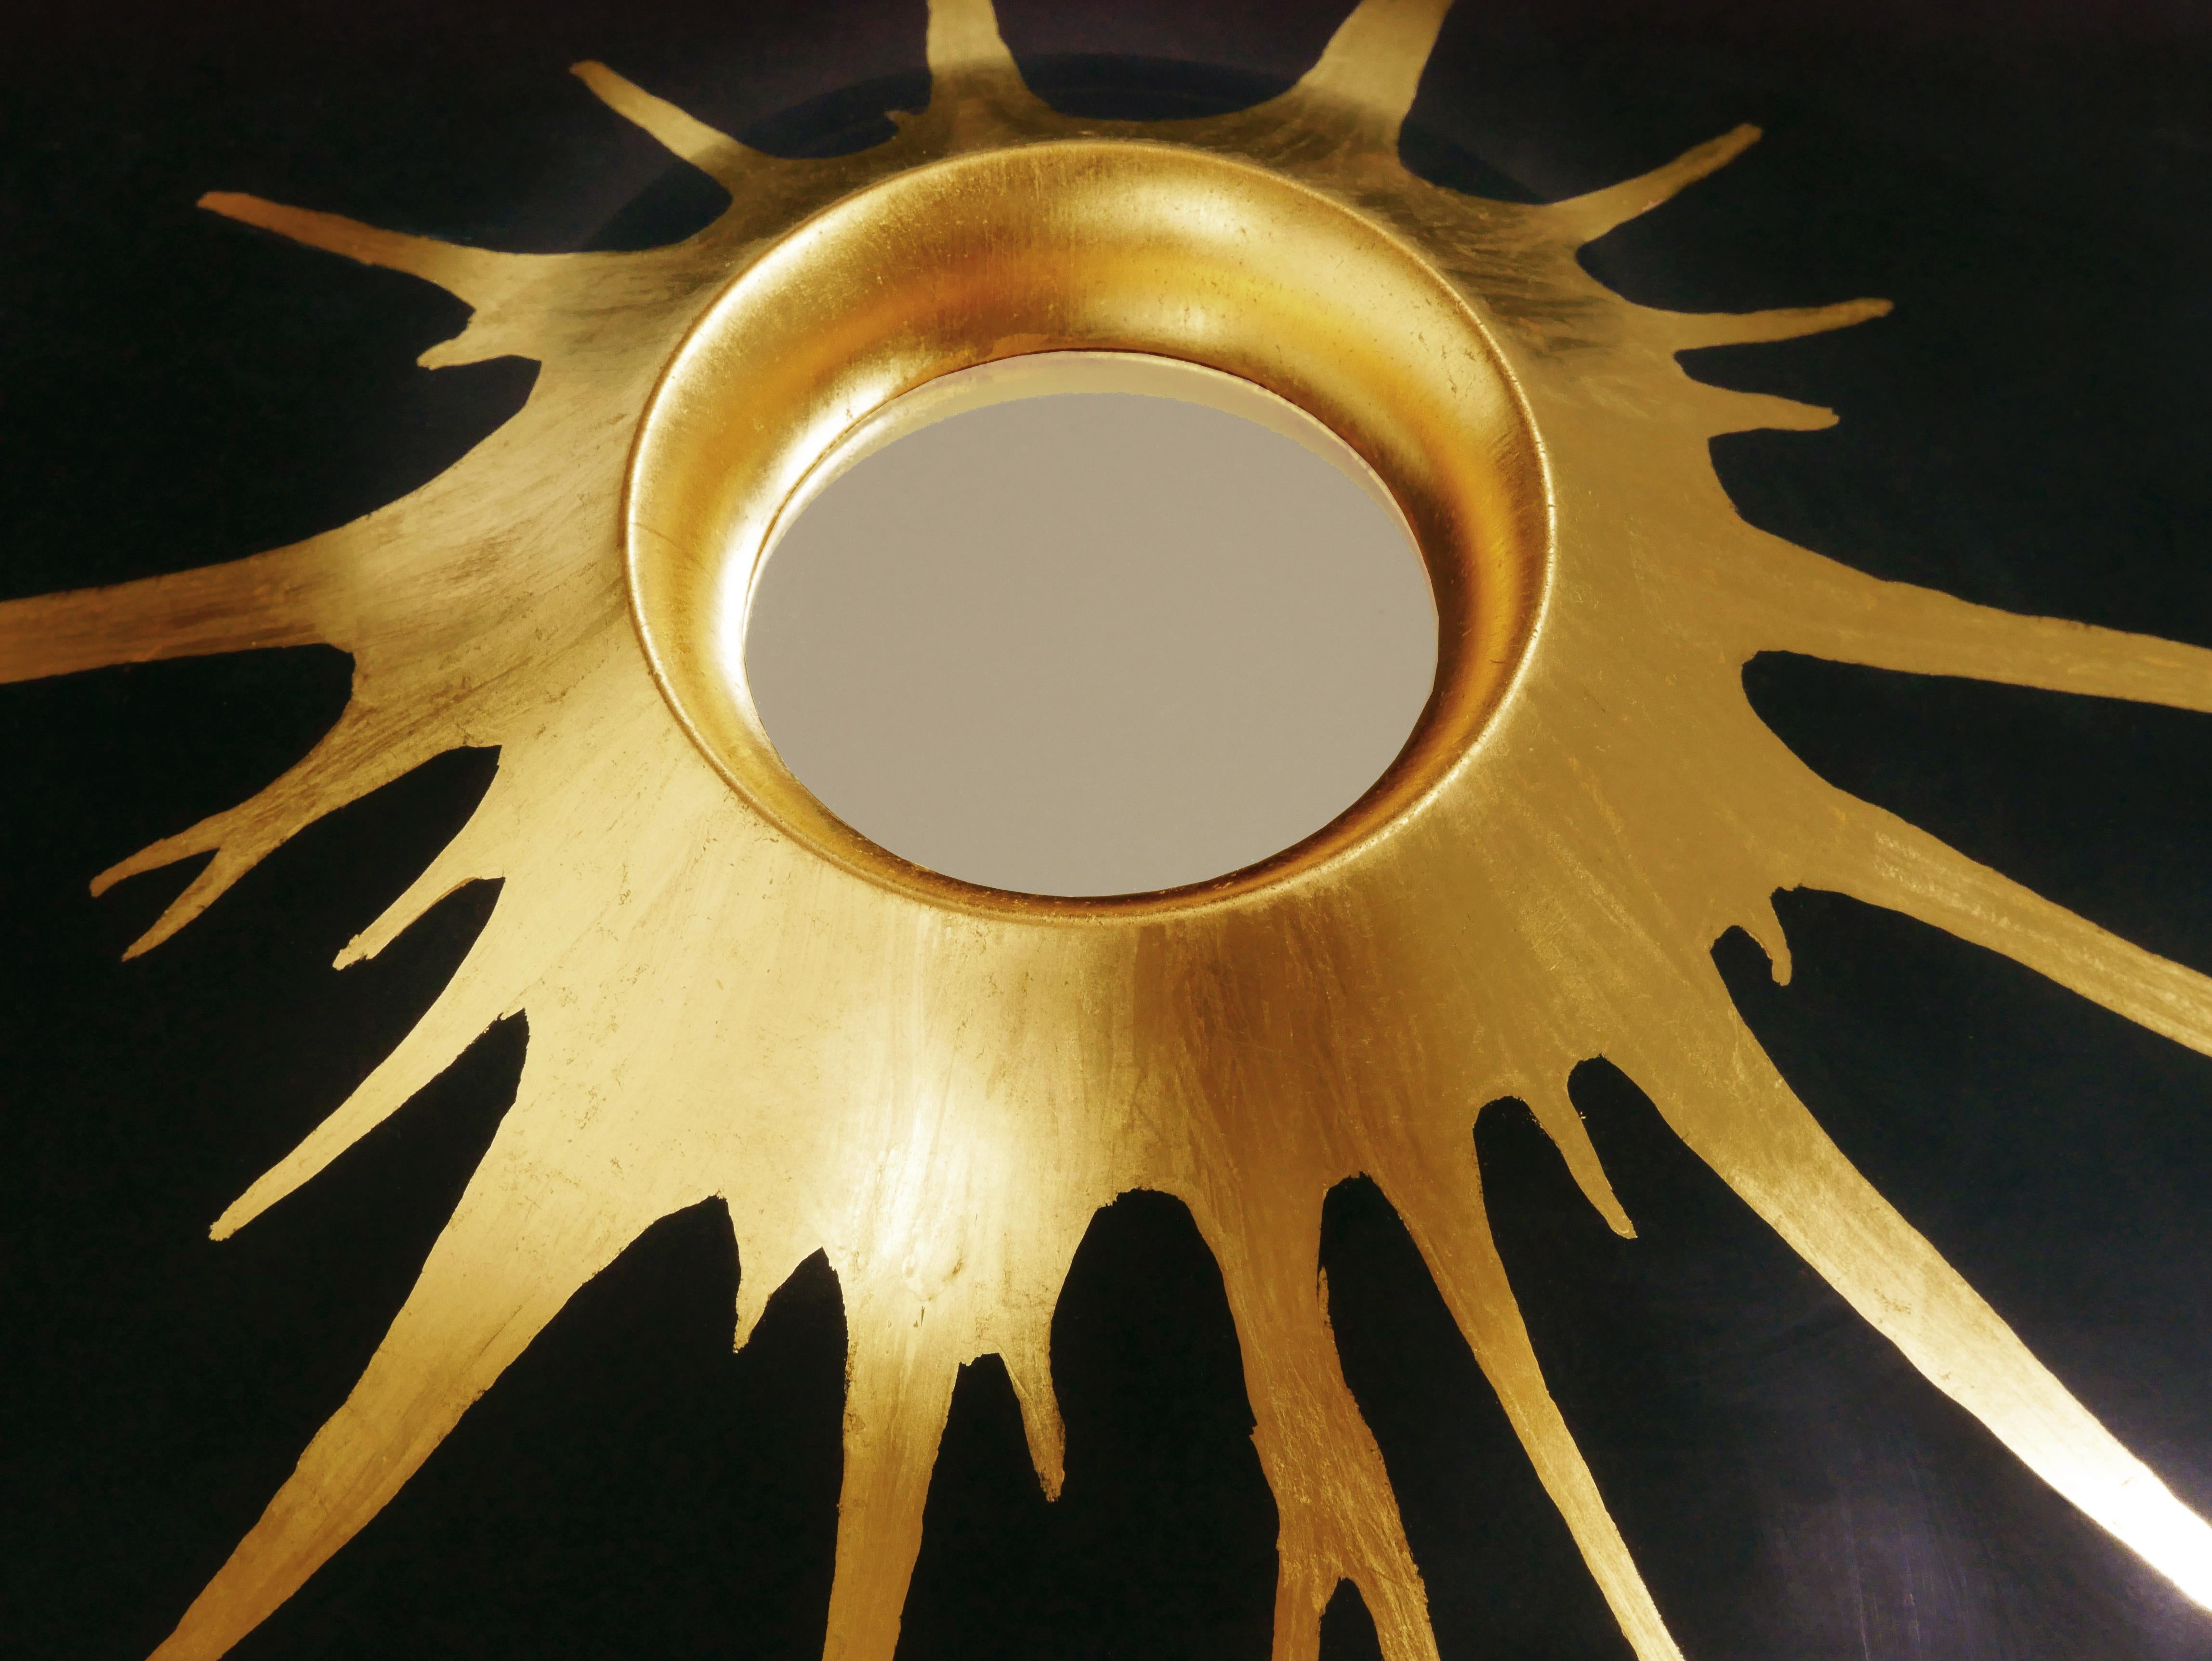 Hand-Crafted Lacquered Wood and Gold Mirror Sculpture, Volcano